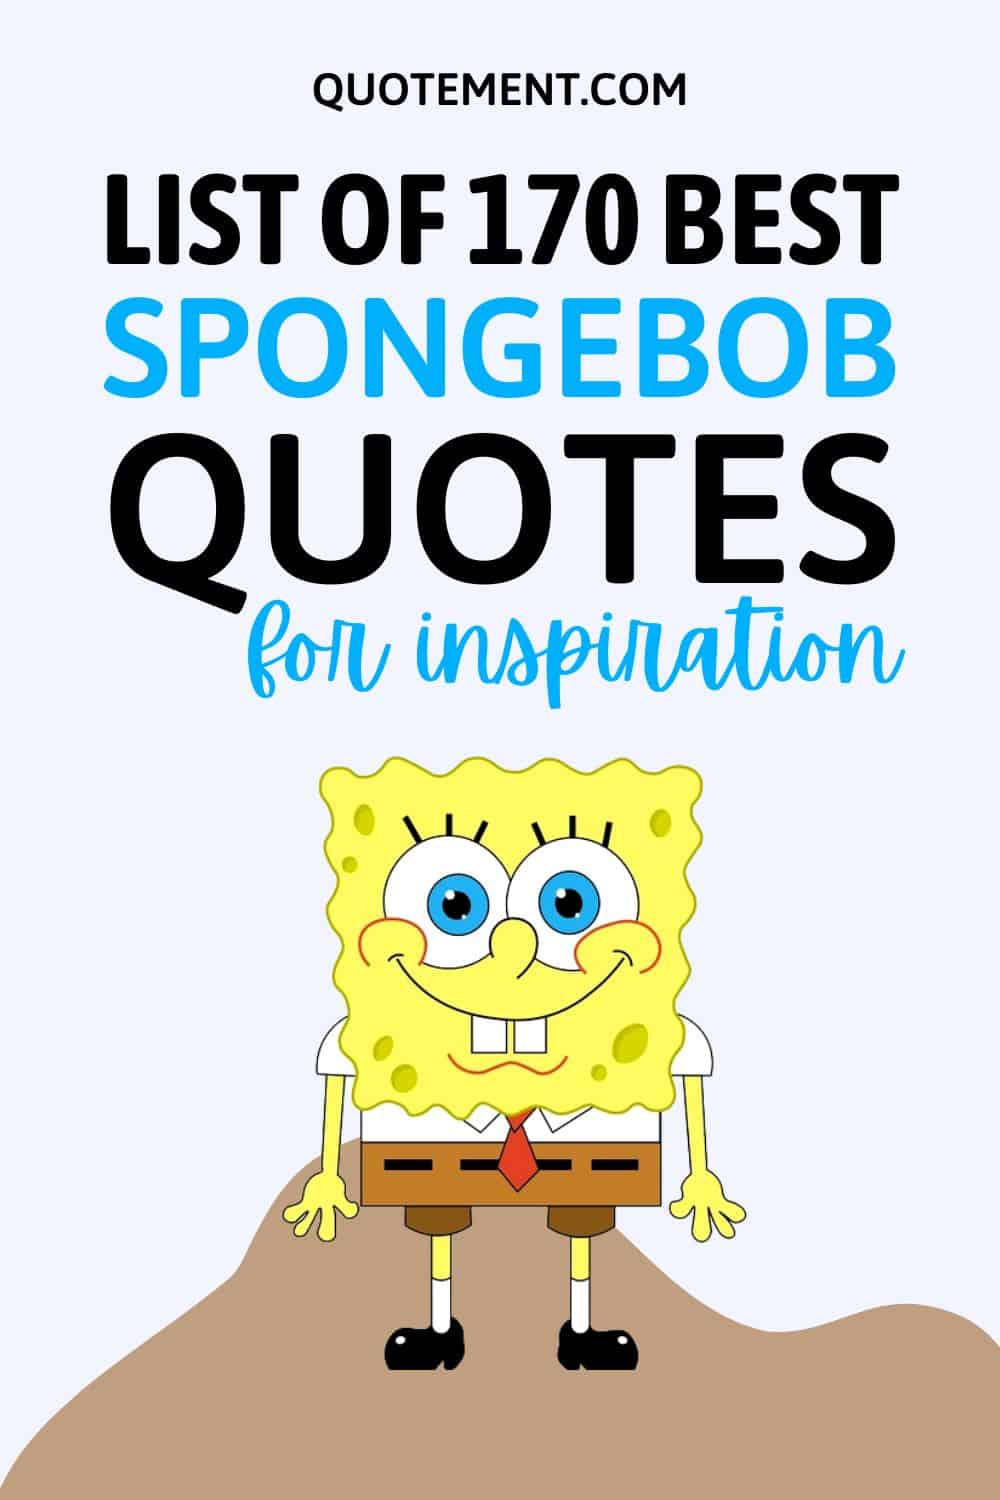 Coolest Collection Of 170 SpongeBob Quotes You Can't Miss
